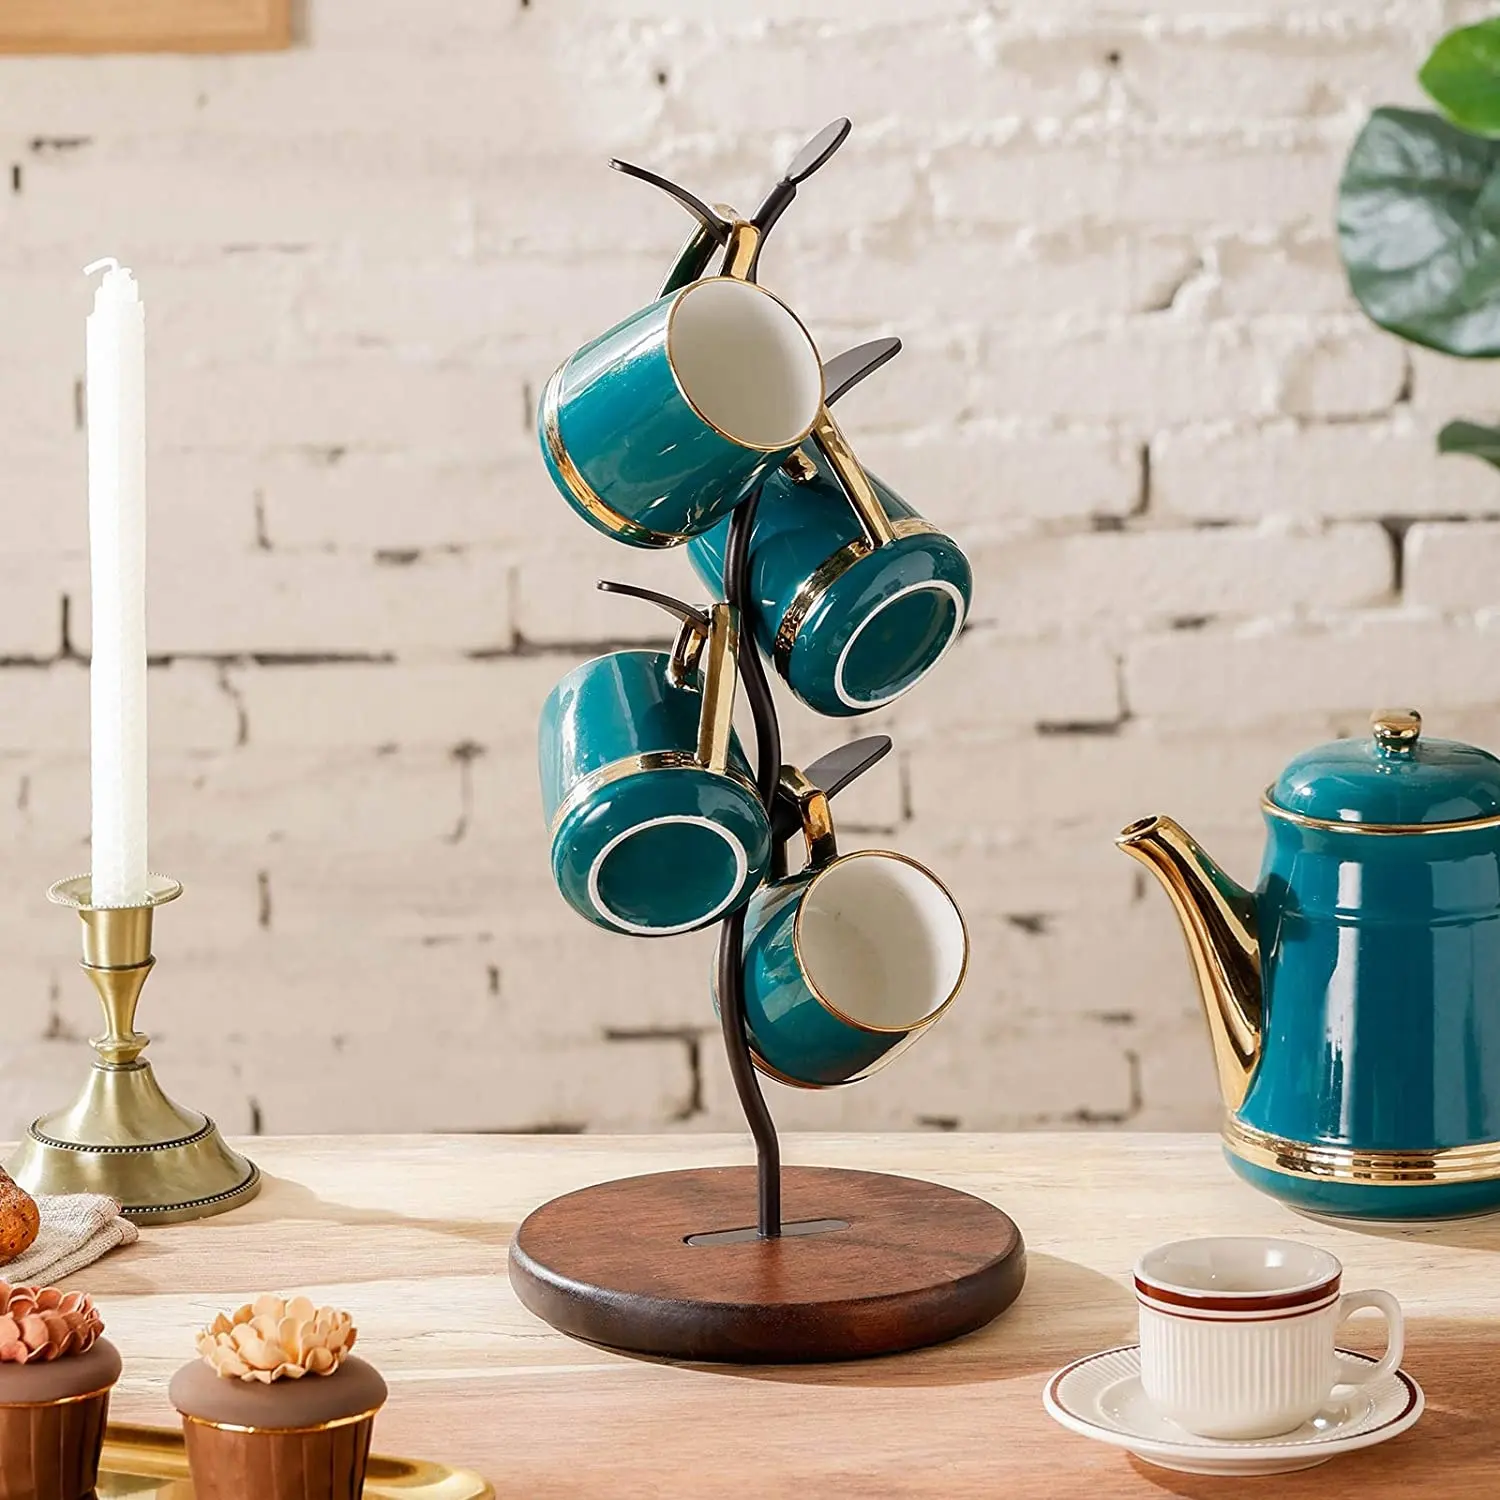 Mug Holder Coffee Cup Stand Counter top Mug Tree Shape Attractive Design Metal Holder Wooden Base Cup Stand Holder Kitchen